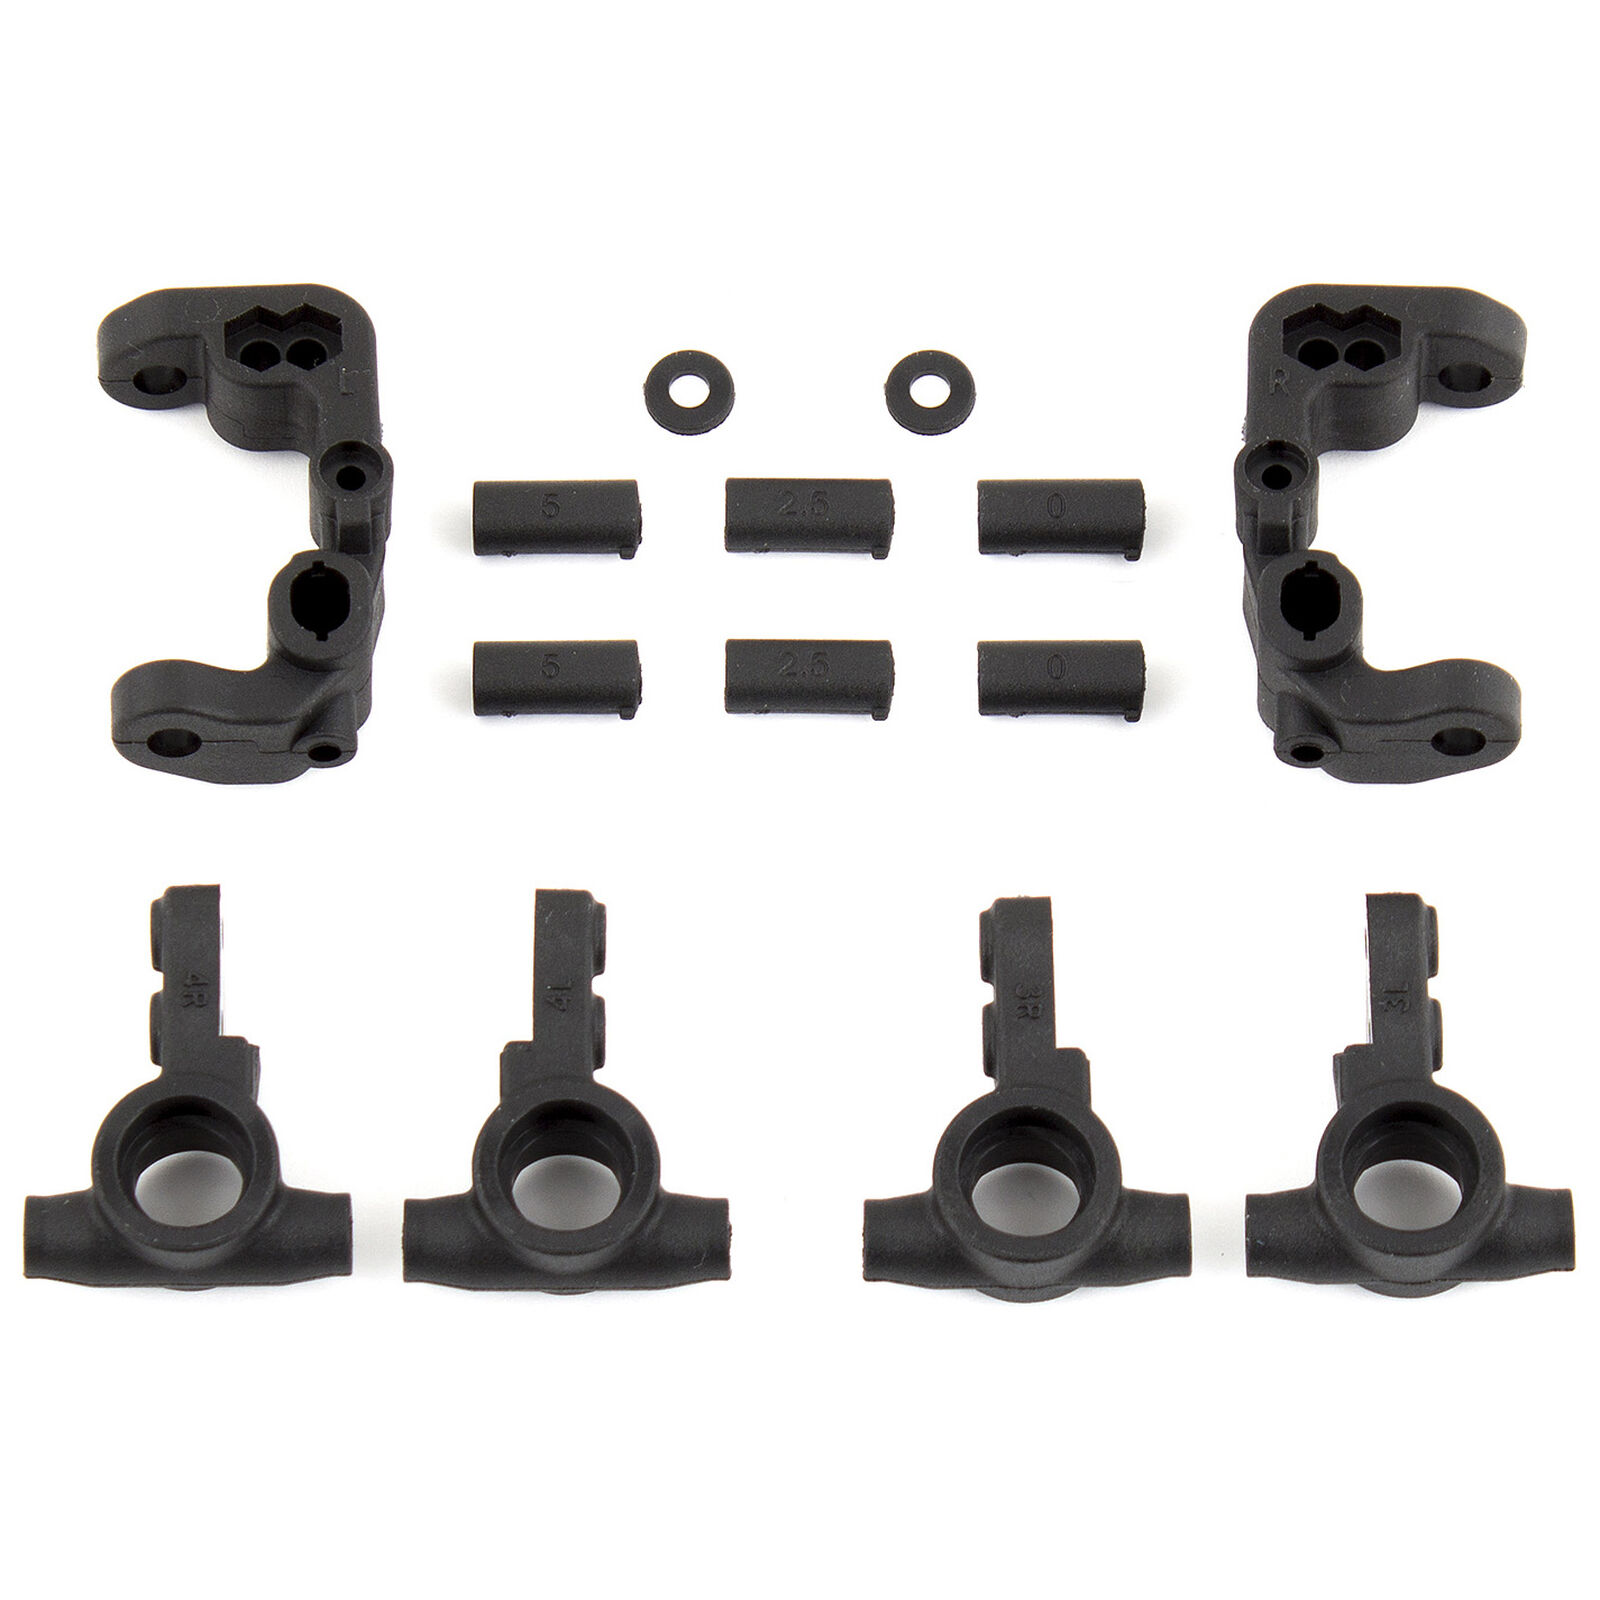 Caster and Steering Blocks: B6.1